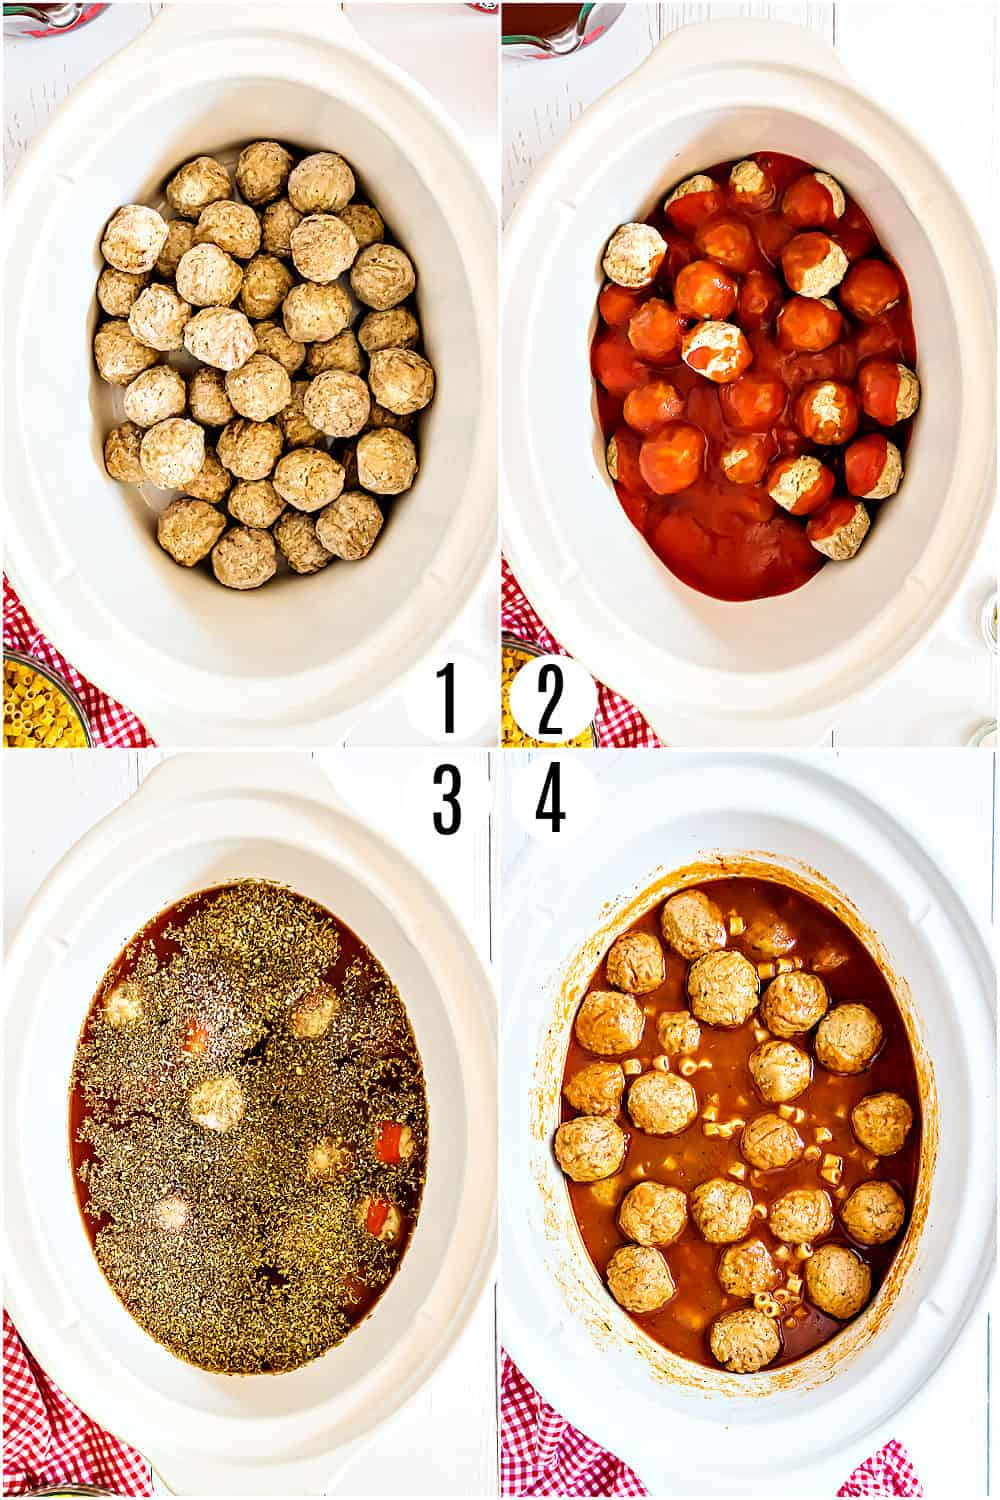 Step by step photos showing how to make spaghettios and meatballs.